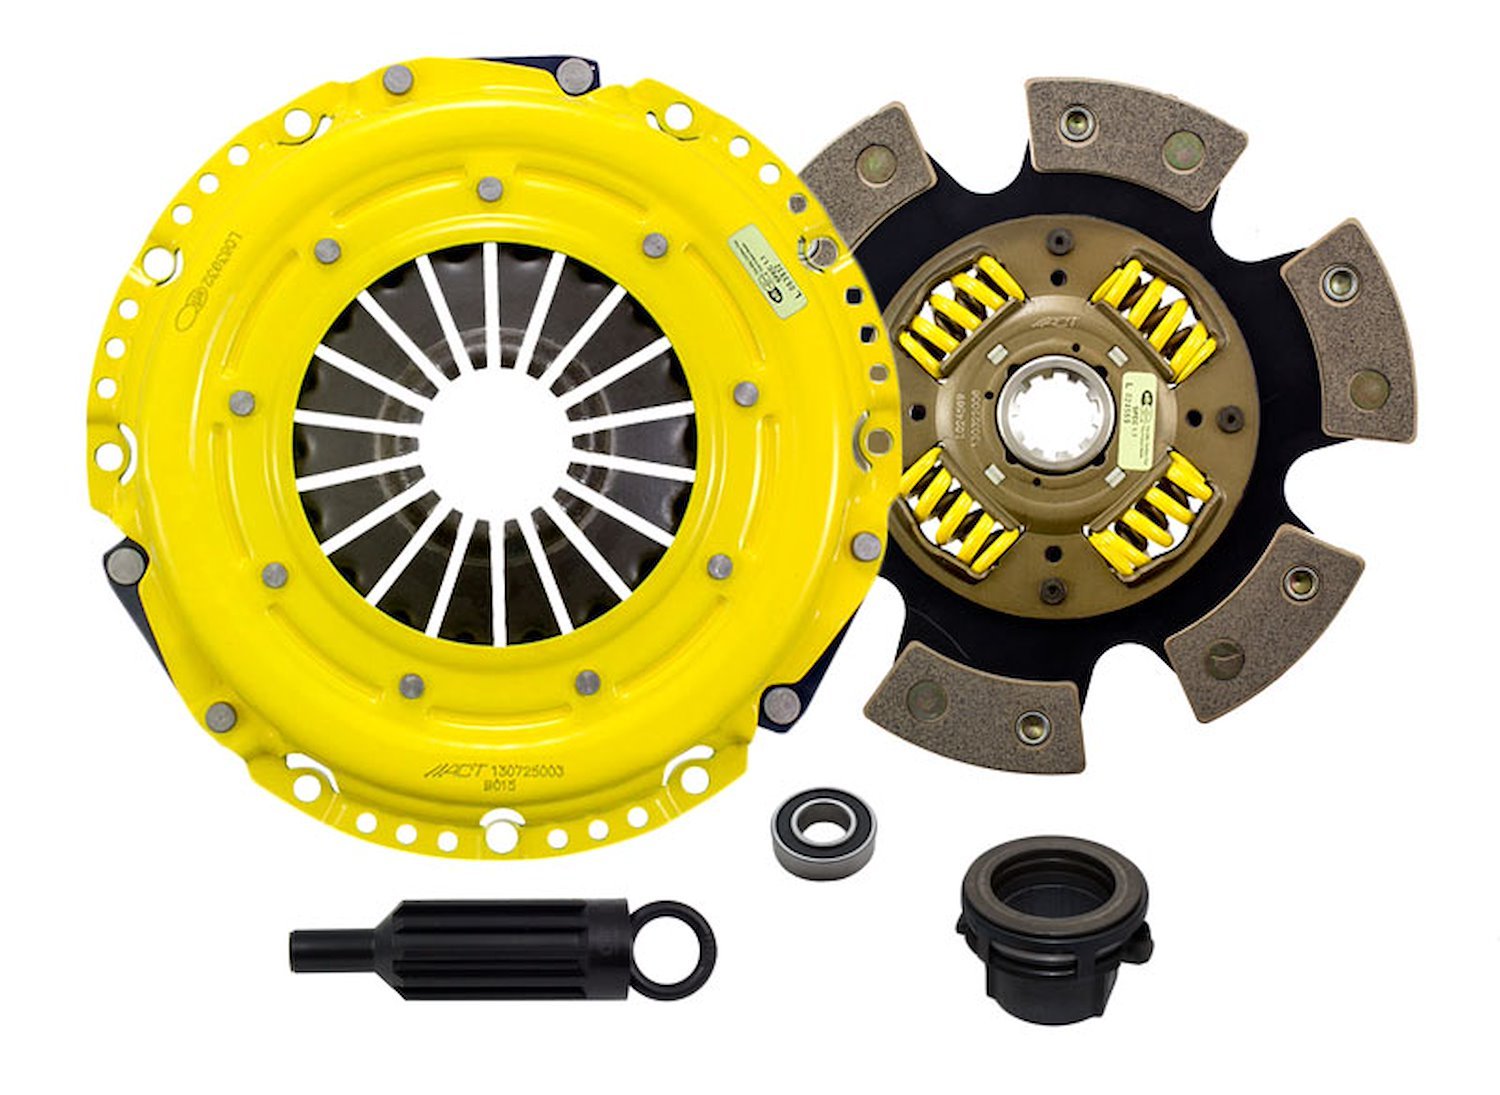 HD/Race Sprung 6-Pad Transmission Clutch Kit Fits Select